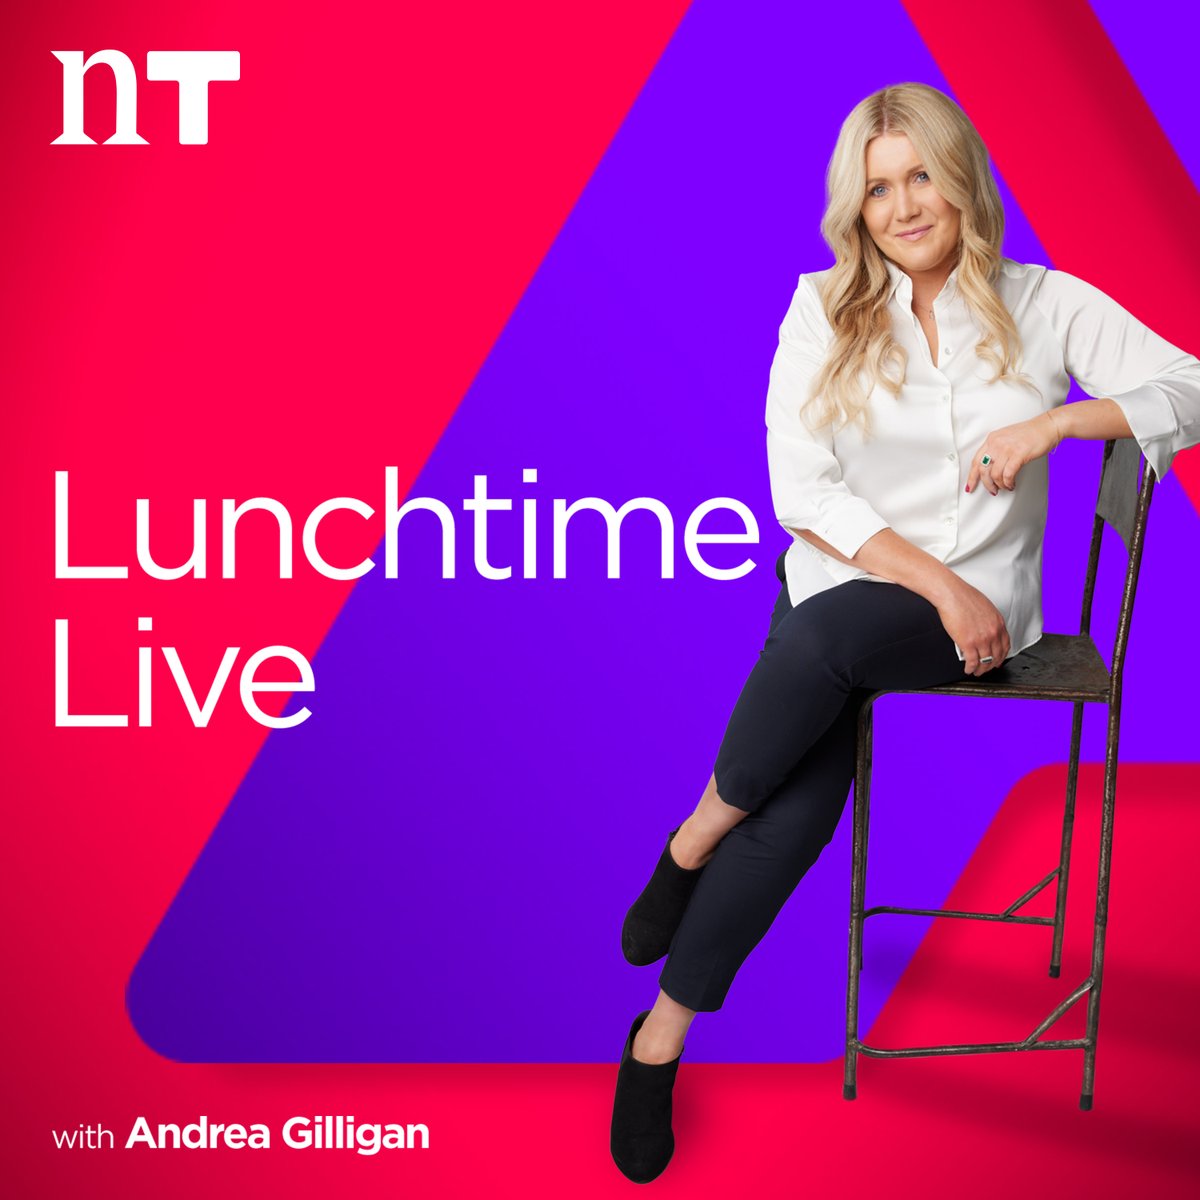 Coming up | 12pm with @andreagilligan 🚬 Should the smoking age be raised to 21? 🍳 The Big Batch with @ButlerPodcast 🧀 Is cheese & coffee a good mix? @SheridansCheese ➡️ Issues in special needs schools @EnableIreland 👩‍⚕️ Ask the GP @DrNinaByrnes